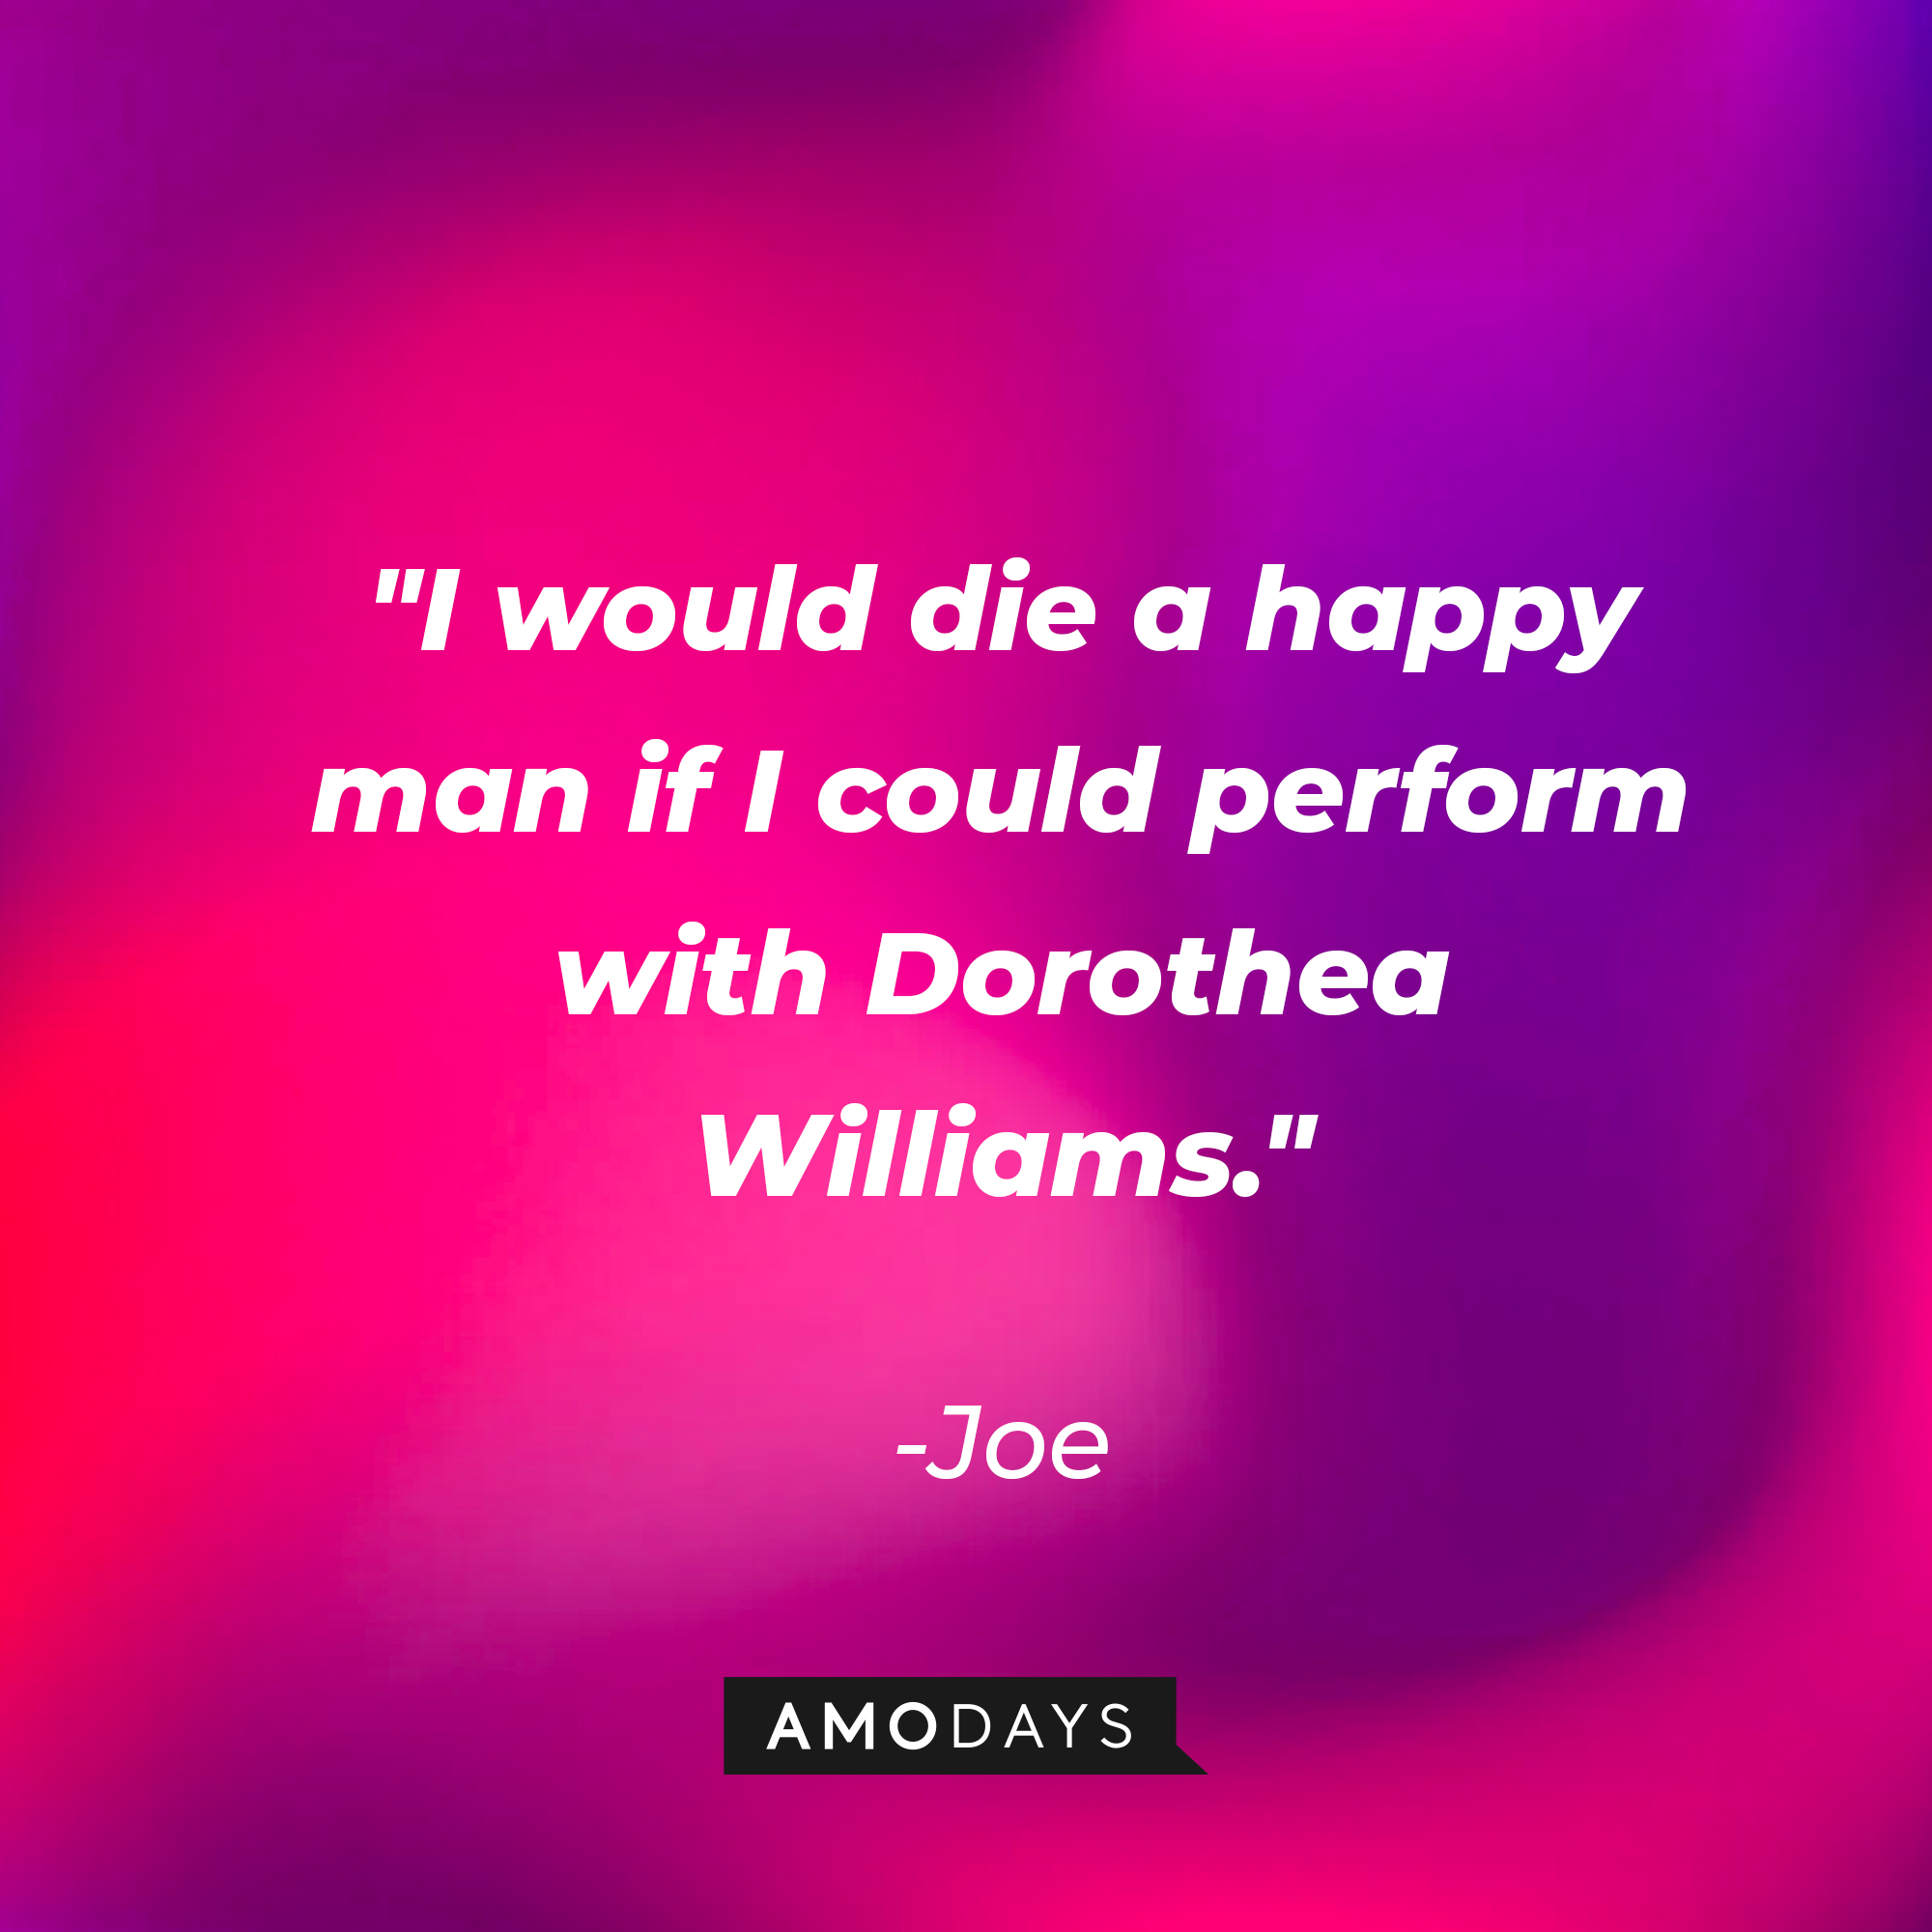 Joe's quote: "I would die a happy man if I could perform with Dorothea Williams." | Source: youtube.com/pixar